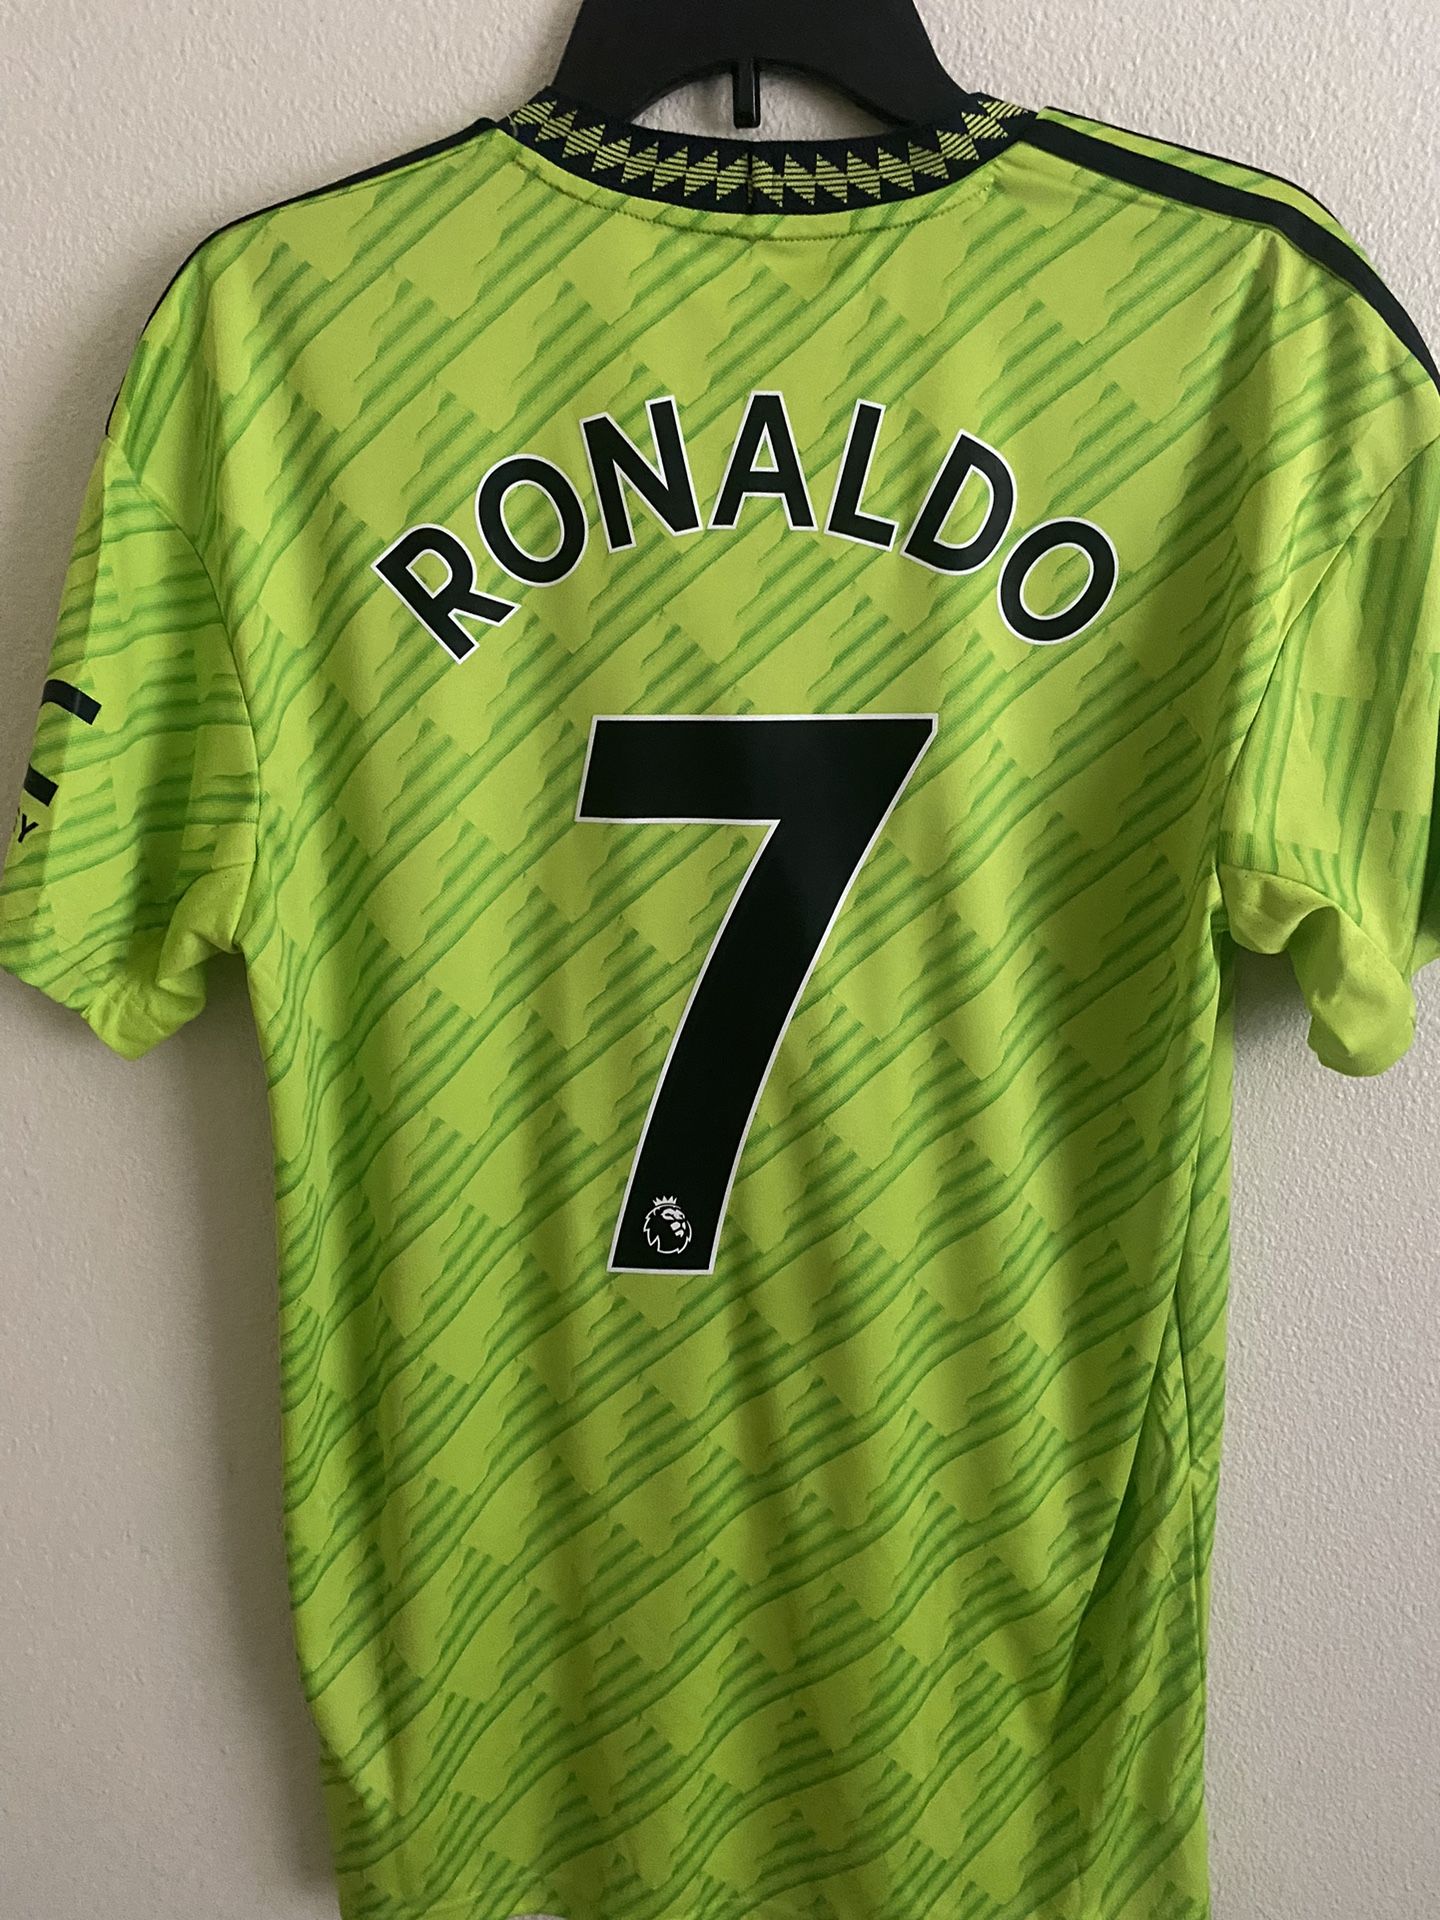 Cristiano Ronaldo Manchester United Jersey for Sale in Tigard, OR - OfferUp